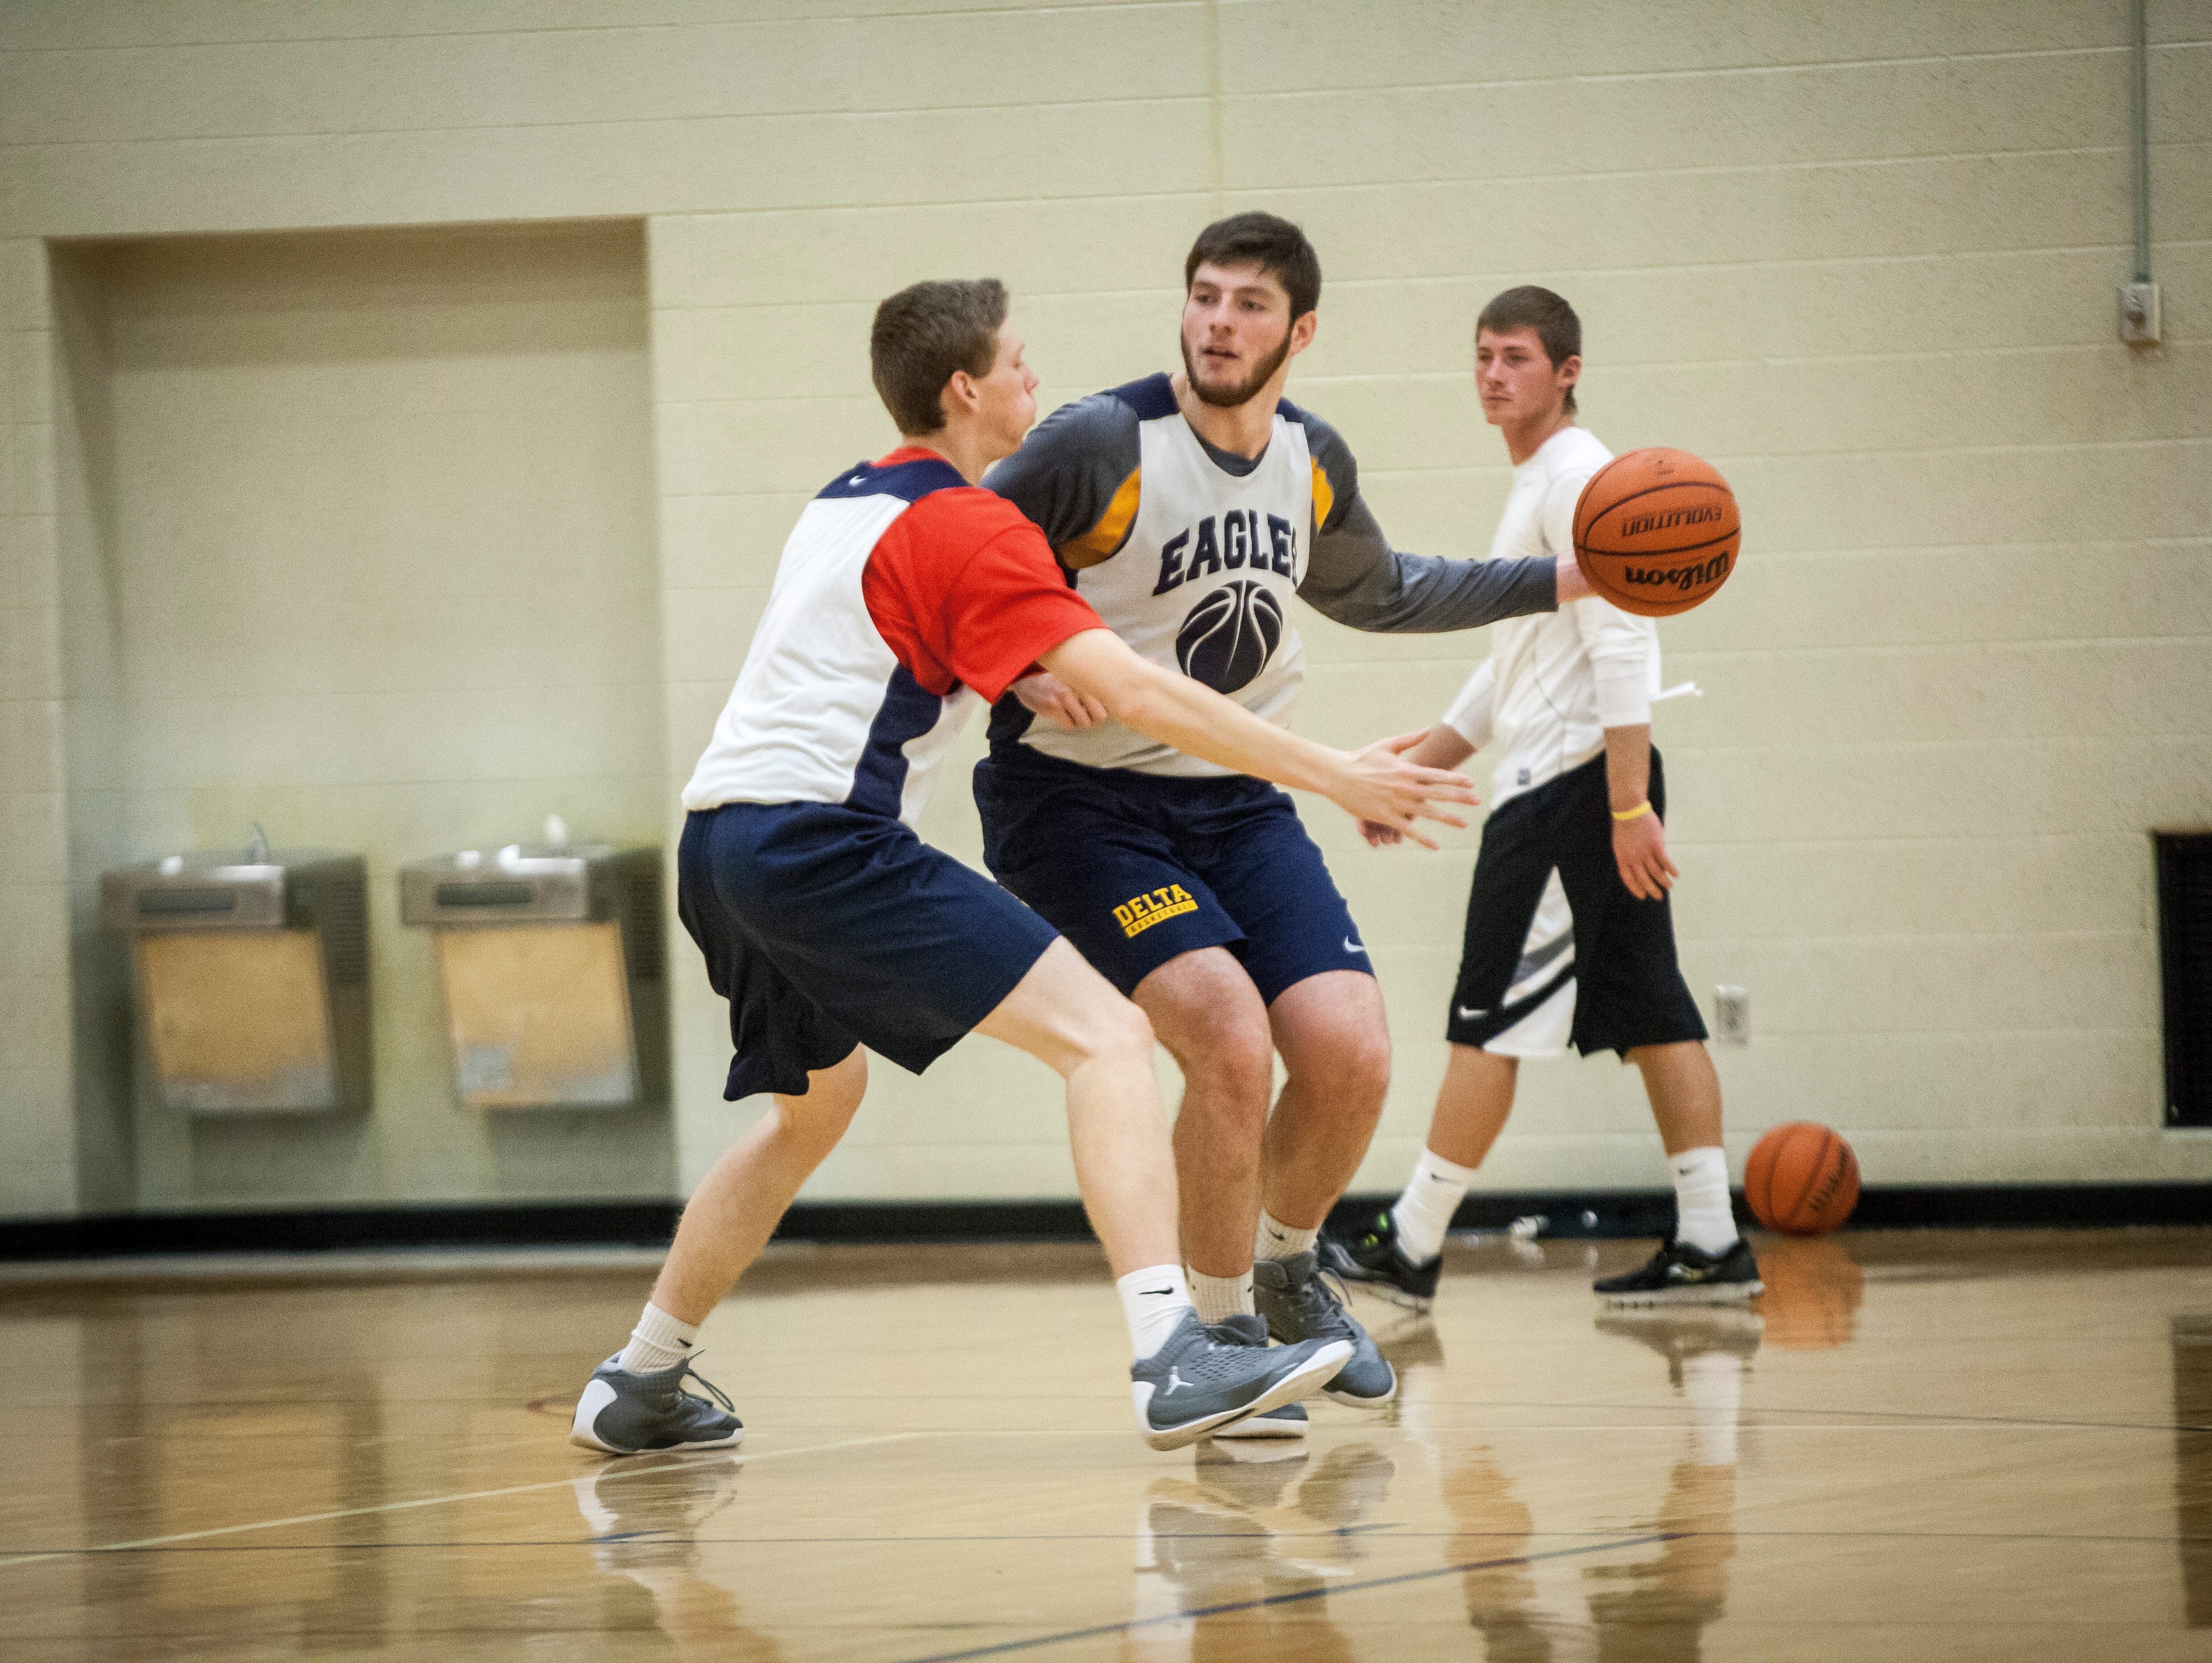 Delta's Boys Basketball Team practices in the side gym of Delta High School Monday afternoon.